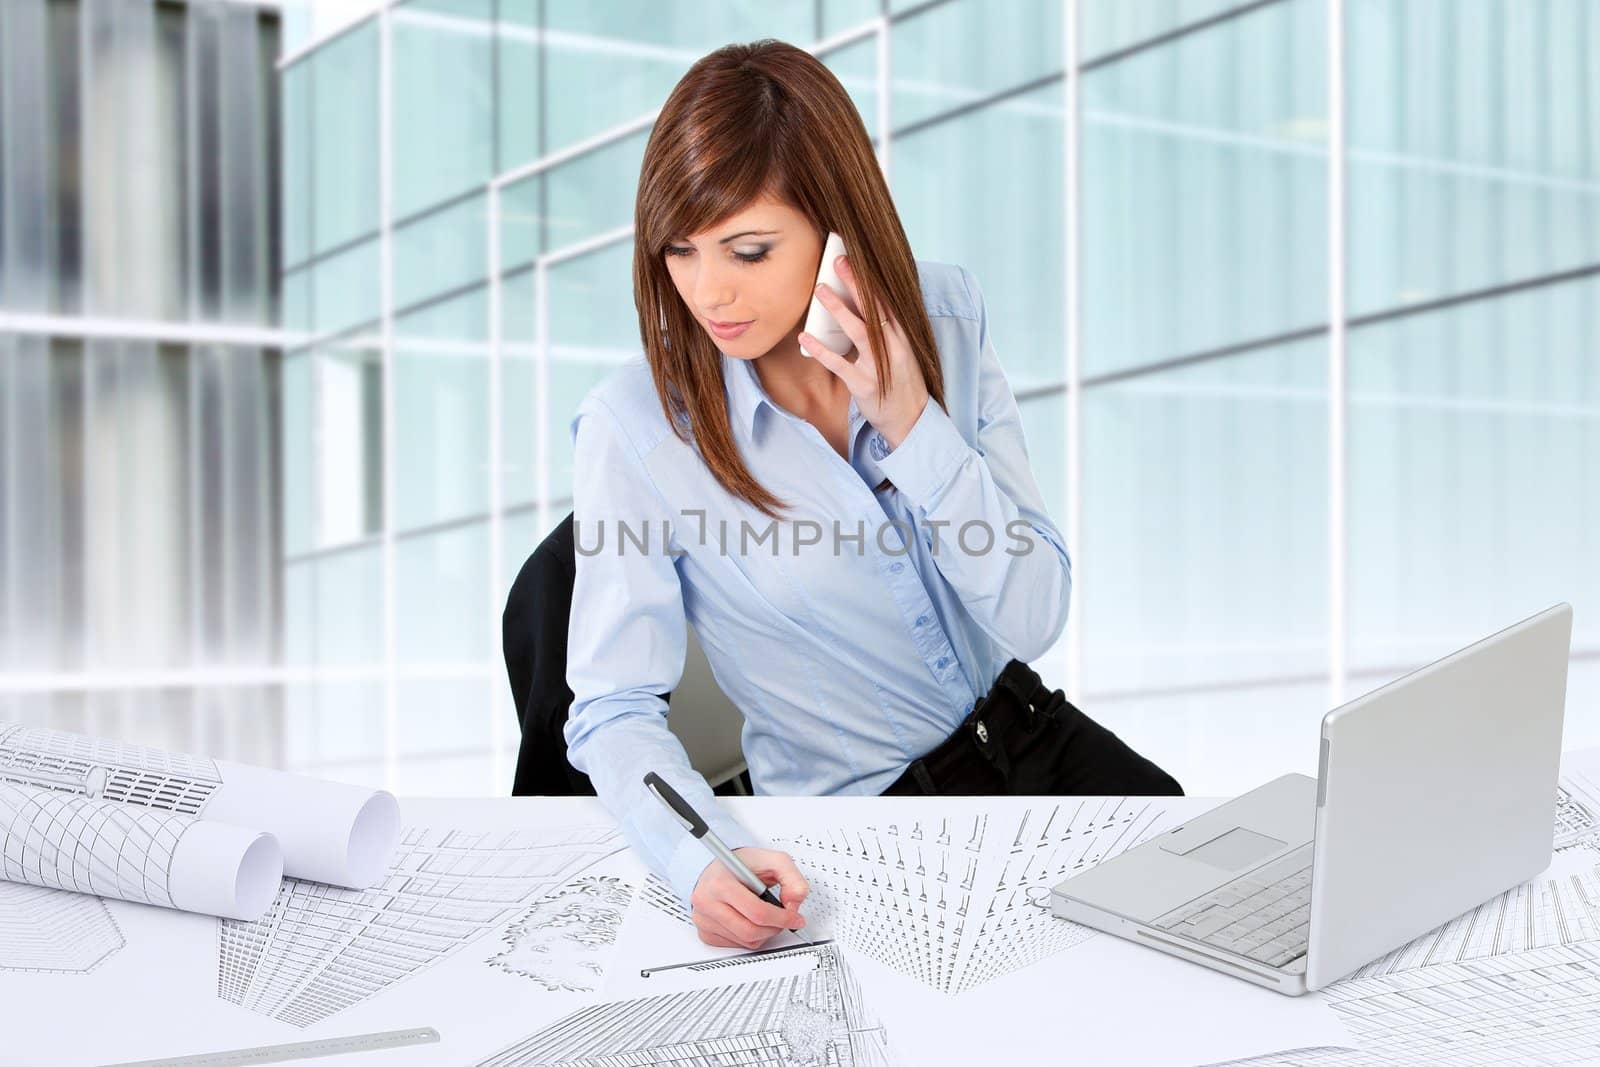 Attractive young female architect working at desk with plans.